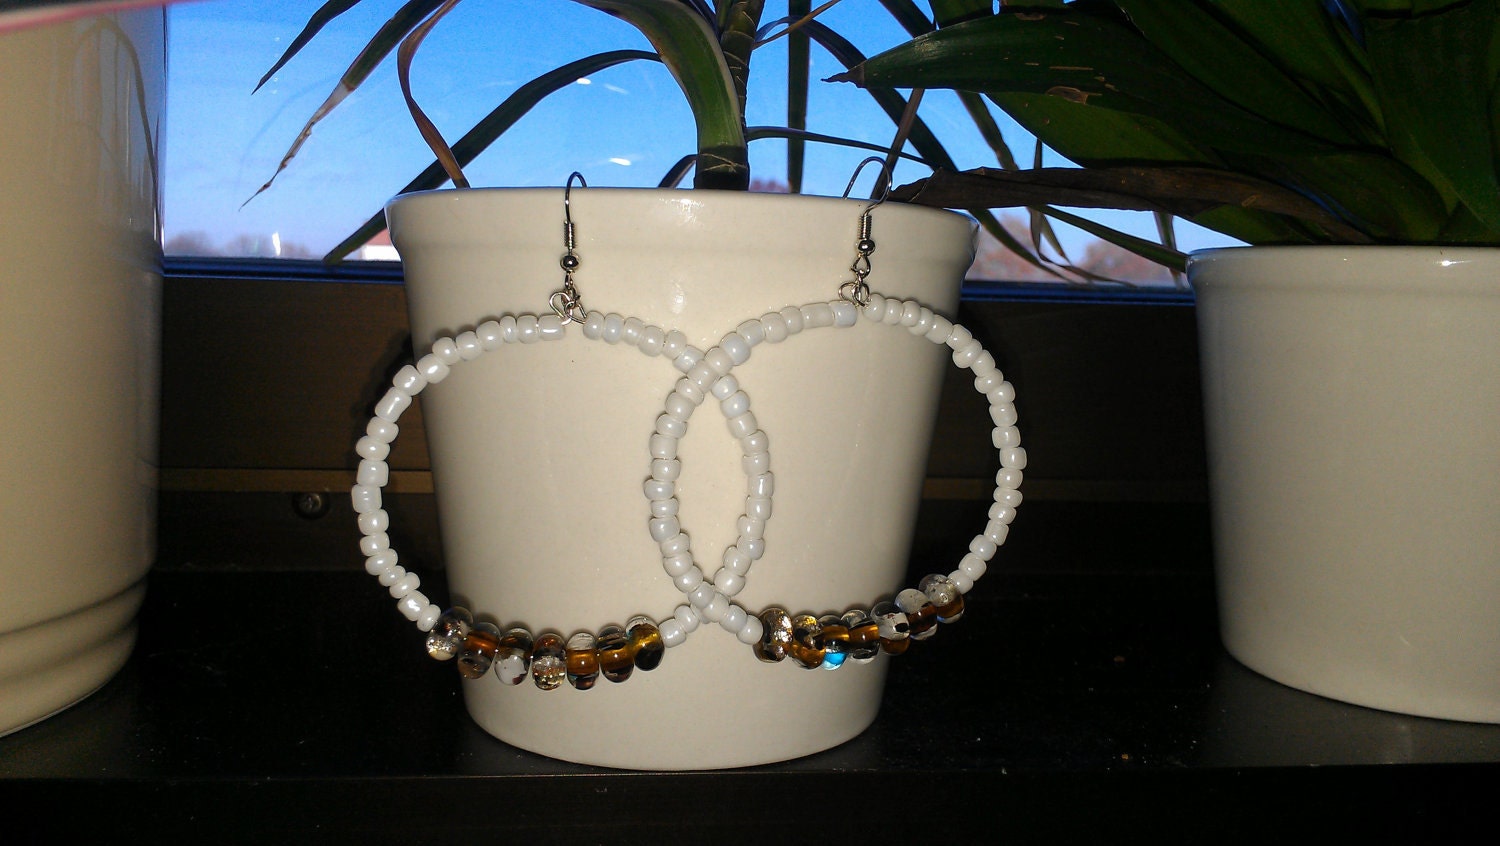 Pearly White Beaded Hoop Earrings with Glass Swirl Beads: "Light As Air"